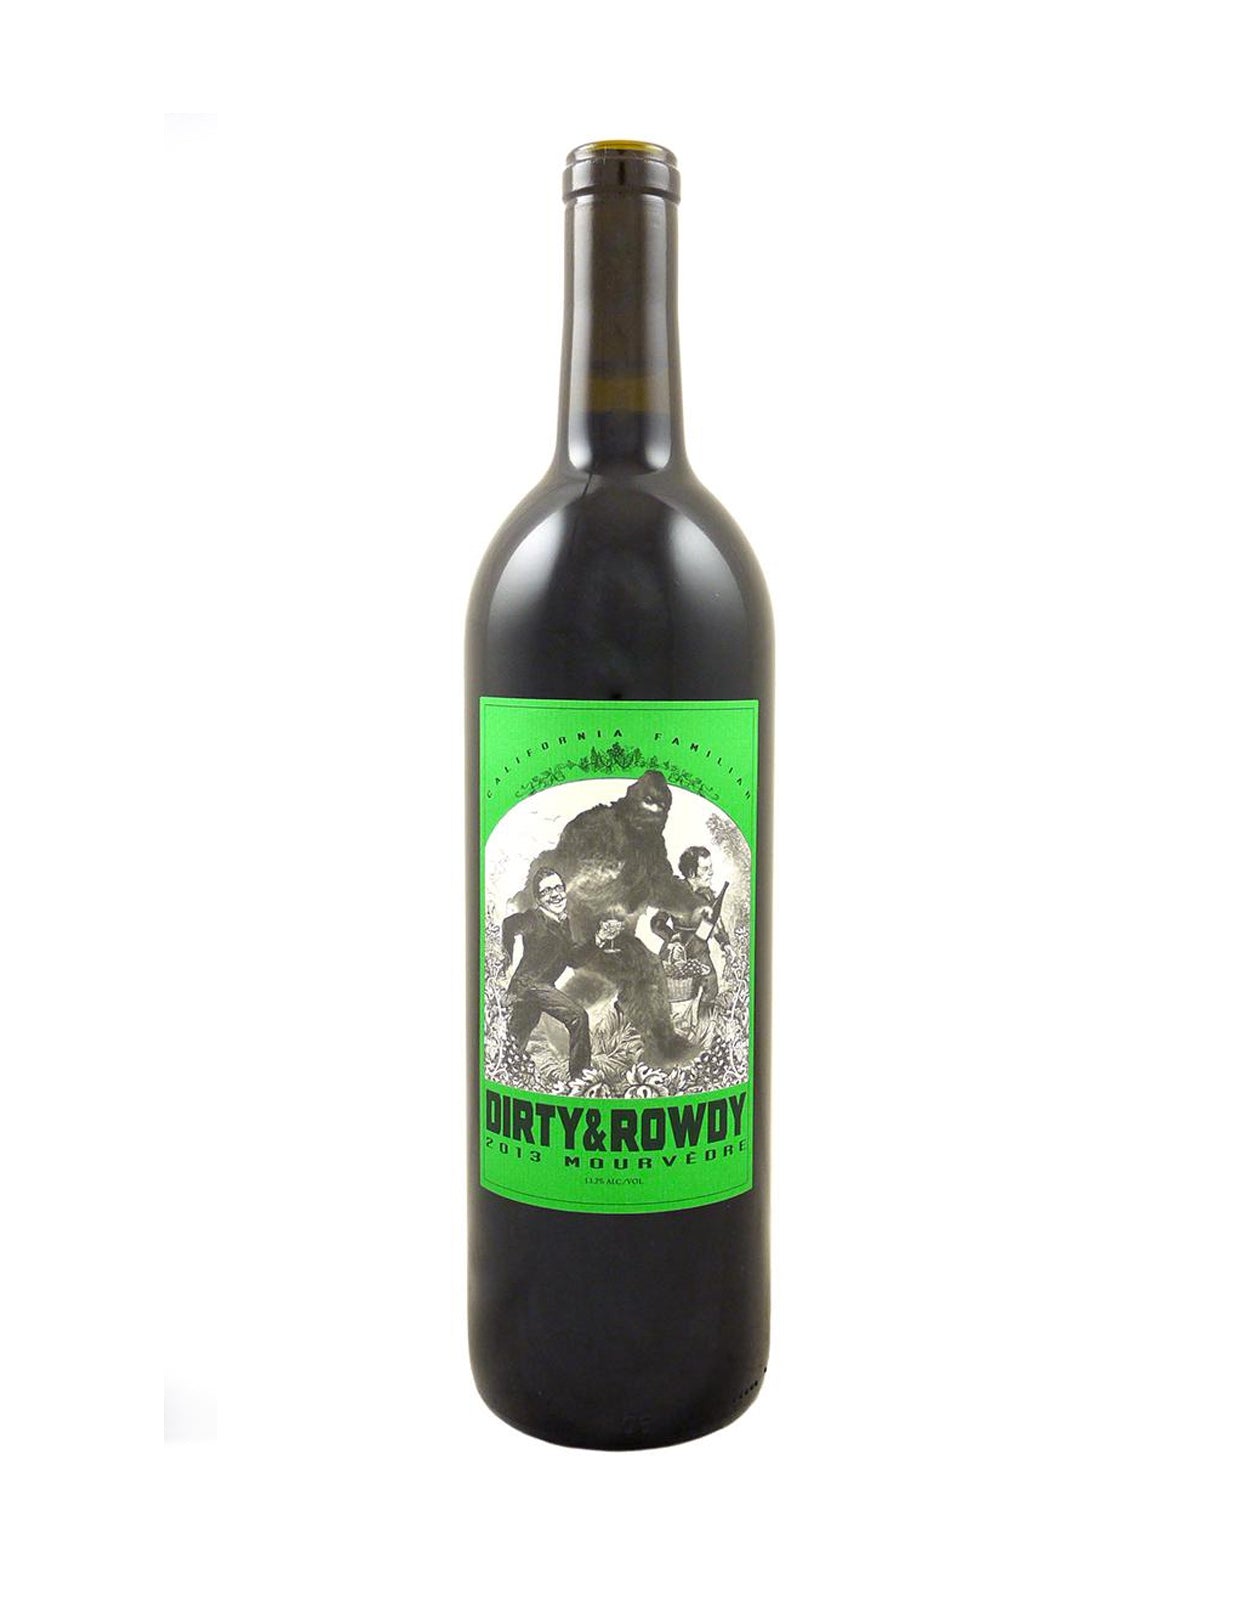 Dirty & Rowdy Mourvedre 2019